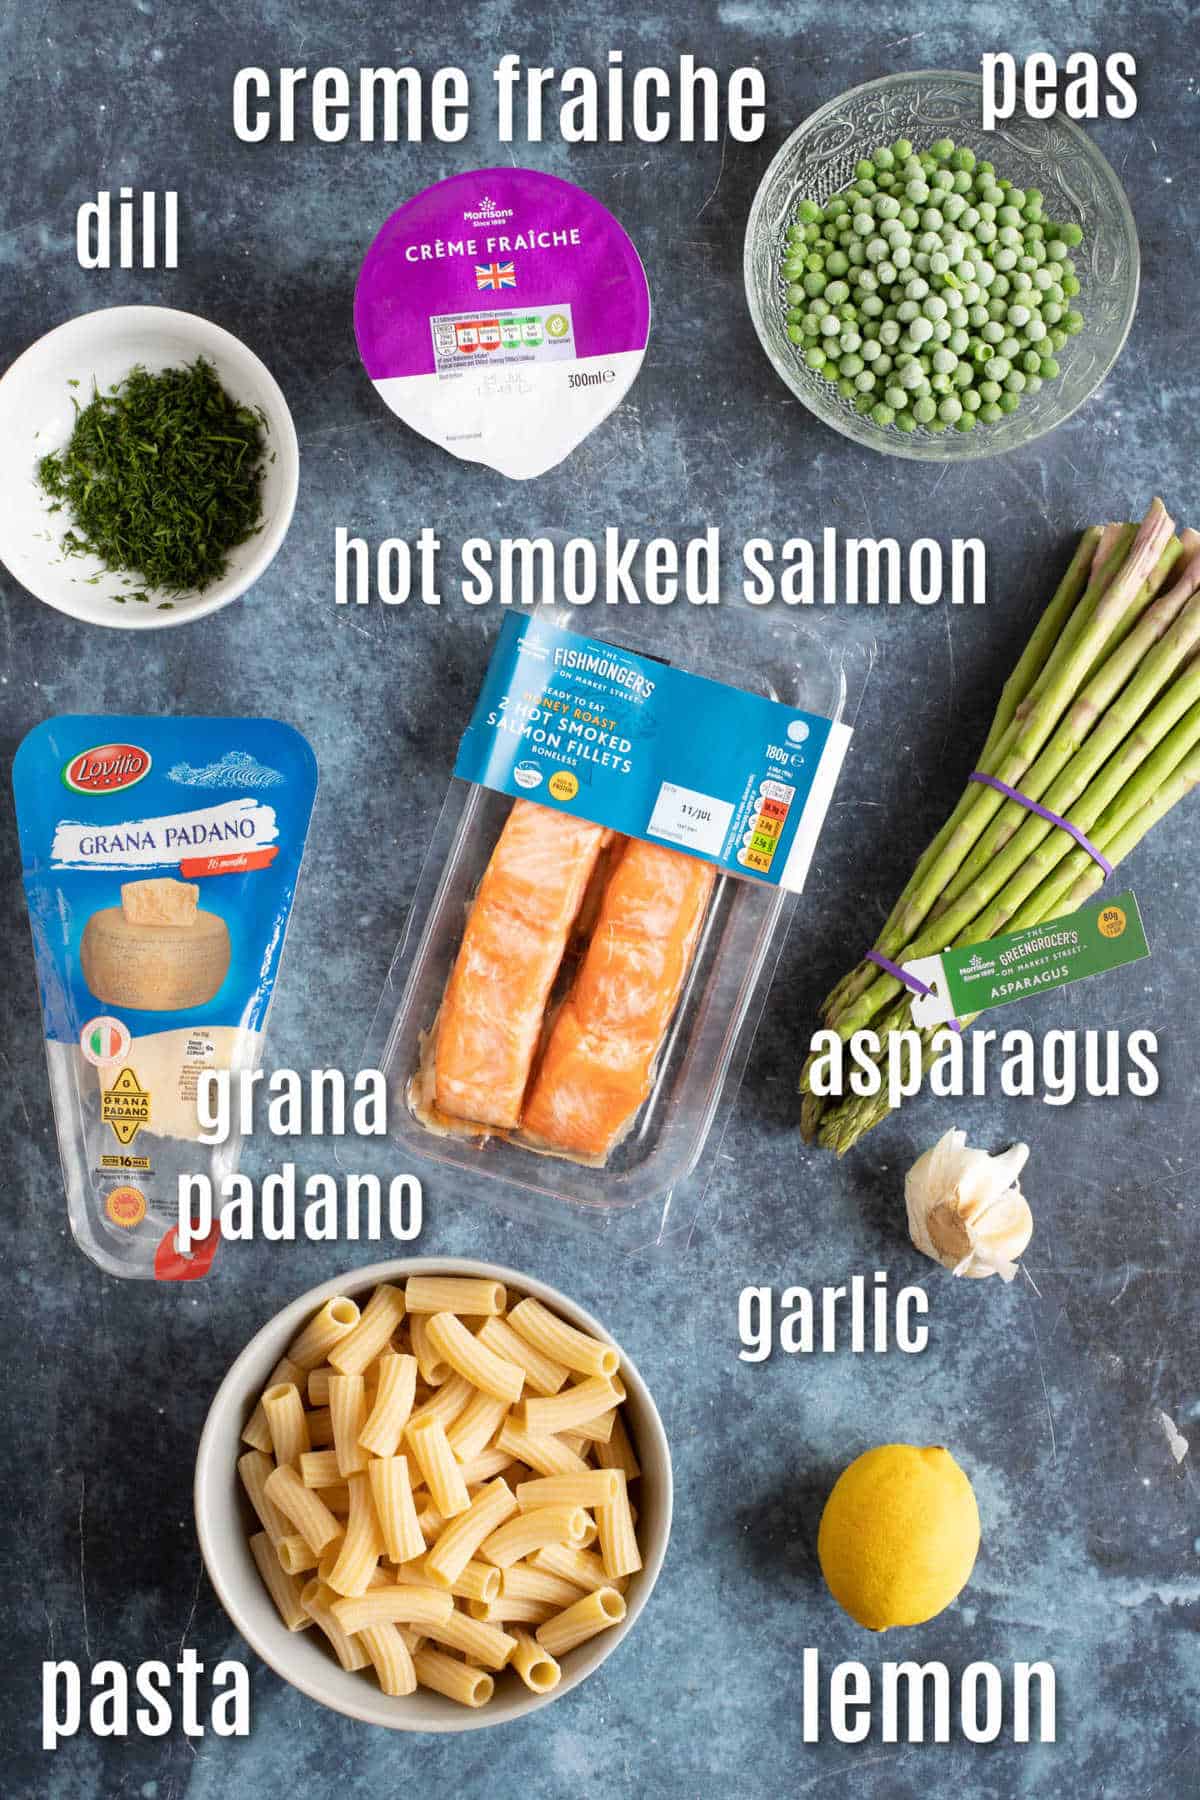 Ingredients for hot smoked salmon and asparagus pasta.